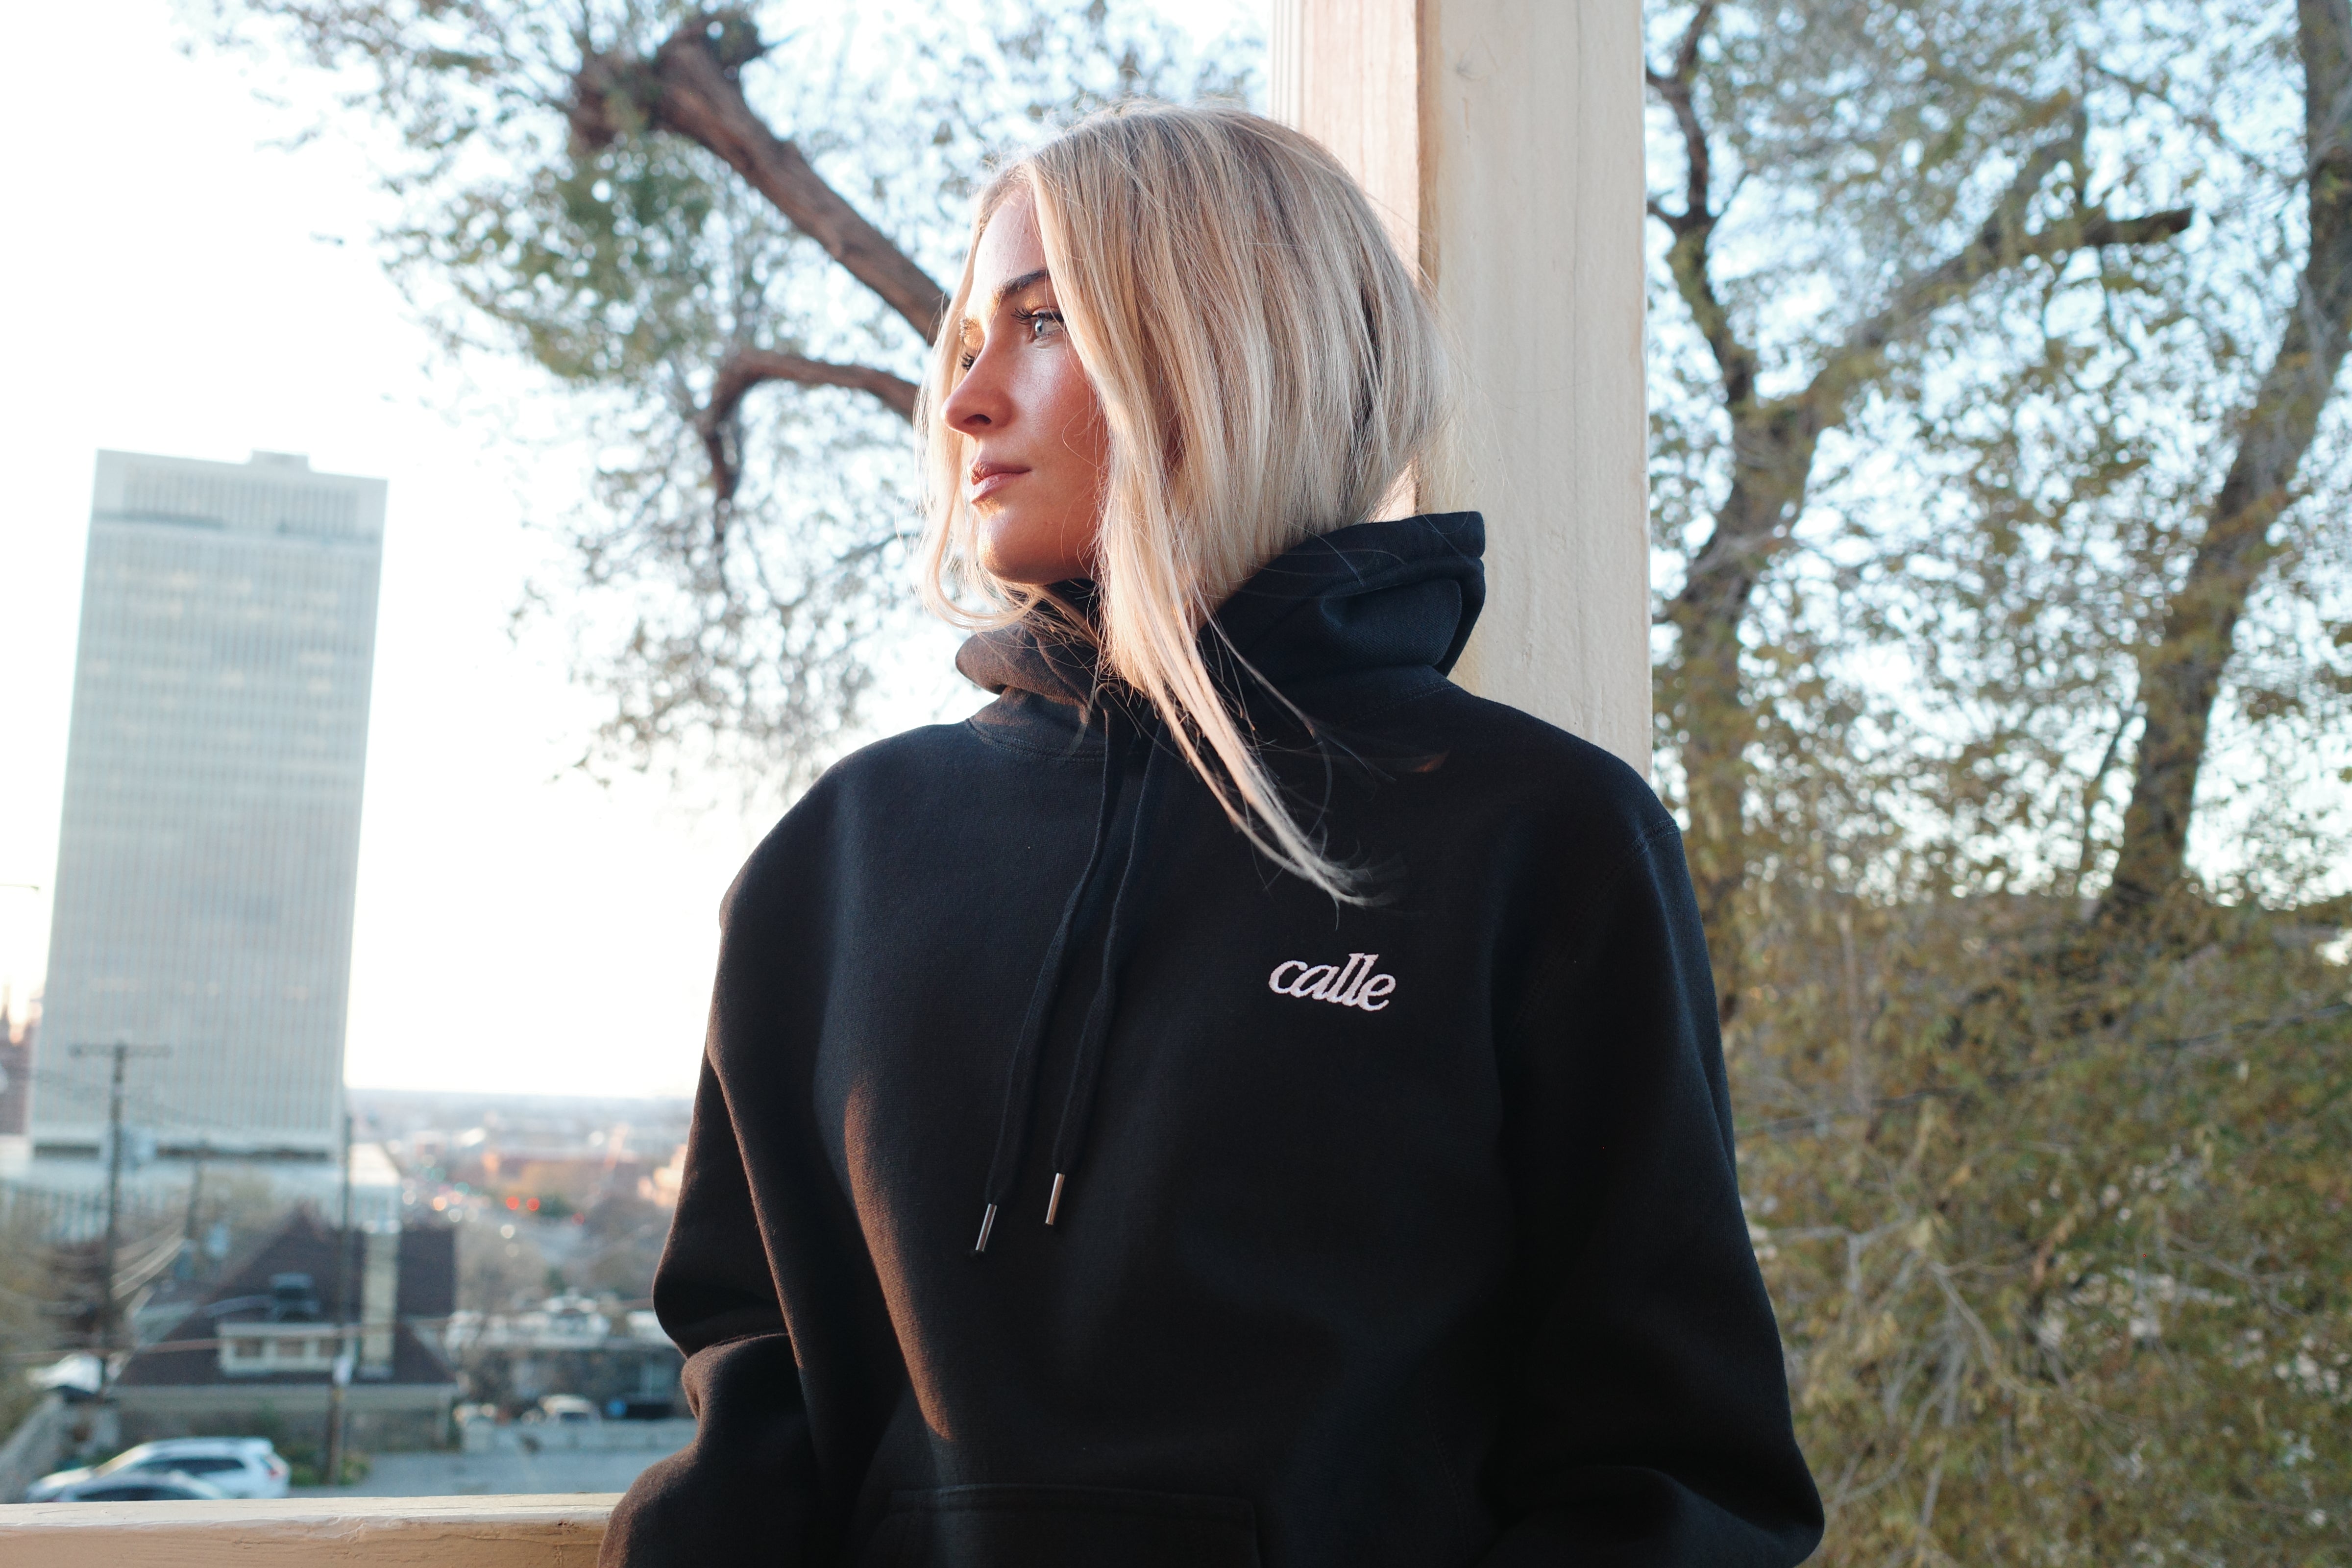 Premium Embroidered Calle Hoodie